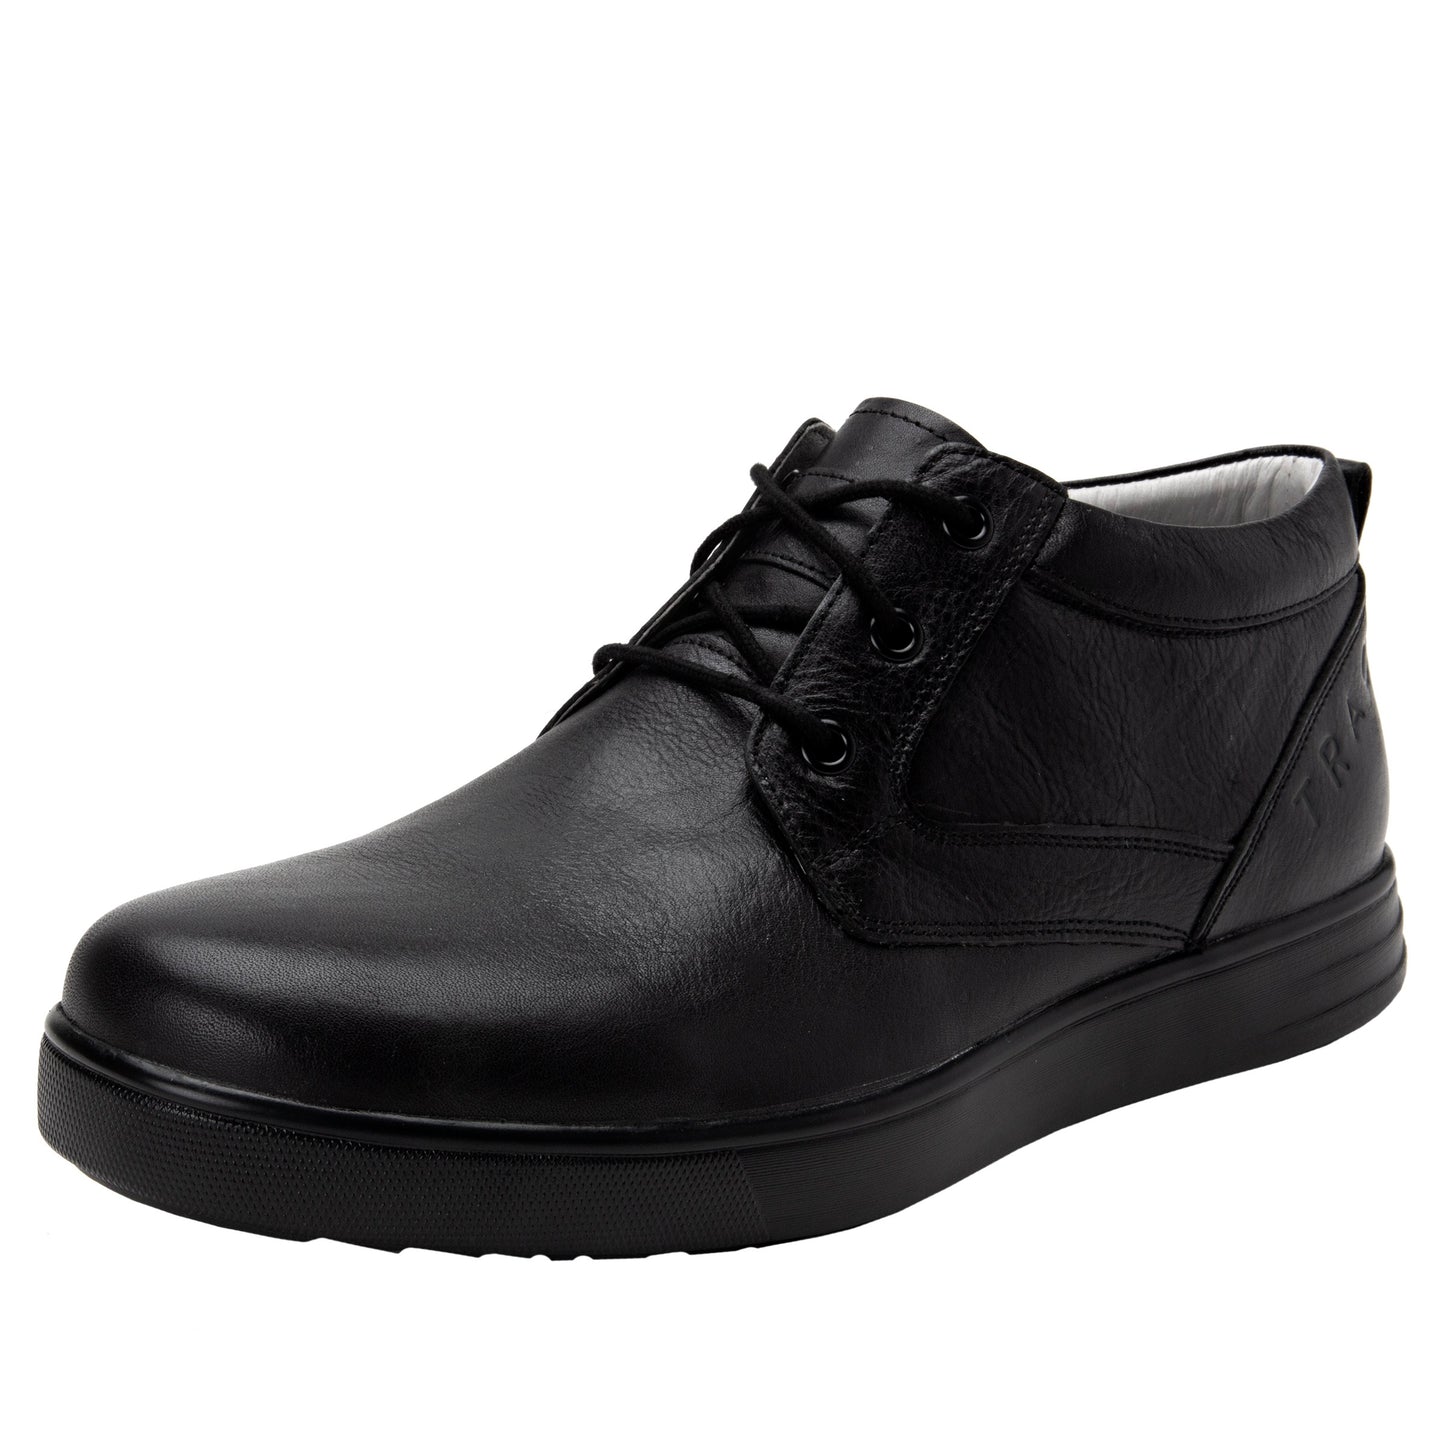 Traq by Alegria Mens Outbaq Crazyhorse in Black at Parker's Clothing and Shoes.